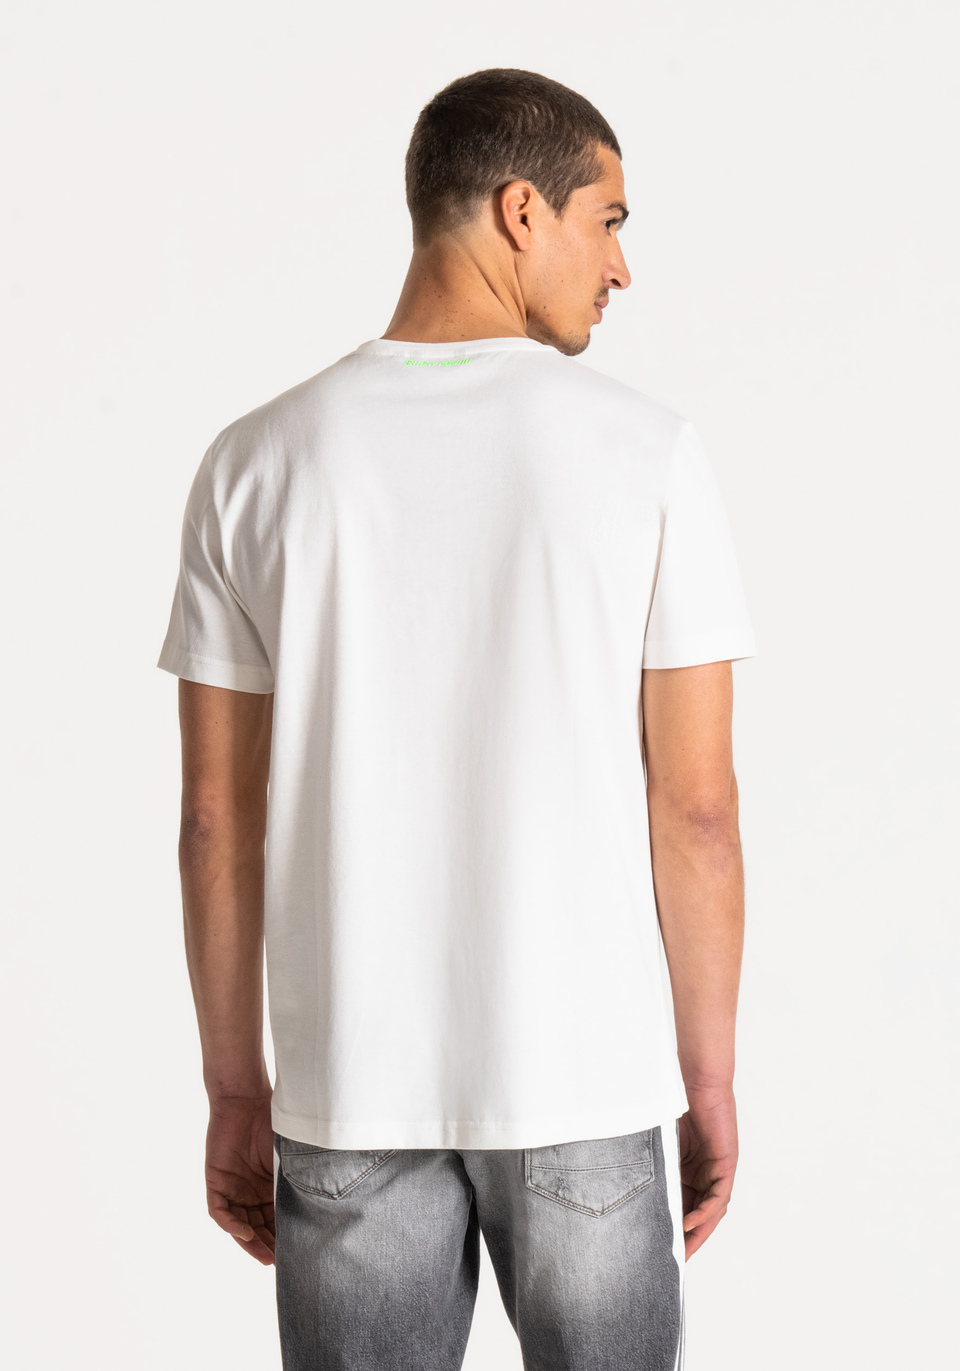 REGULAR-FIT T-SHIRT IN COTTON WITH PRINT DETAIL - Antony Morato Online Shop